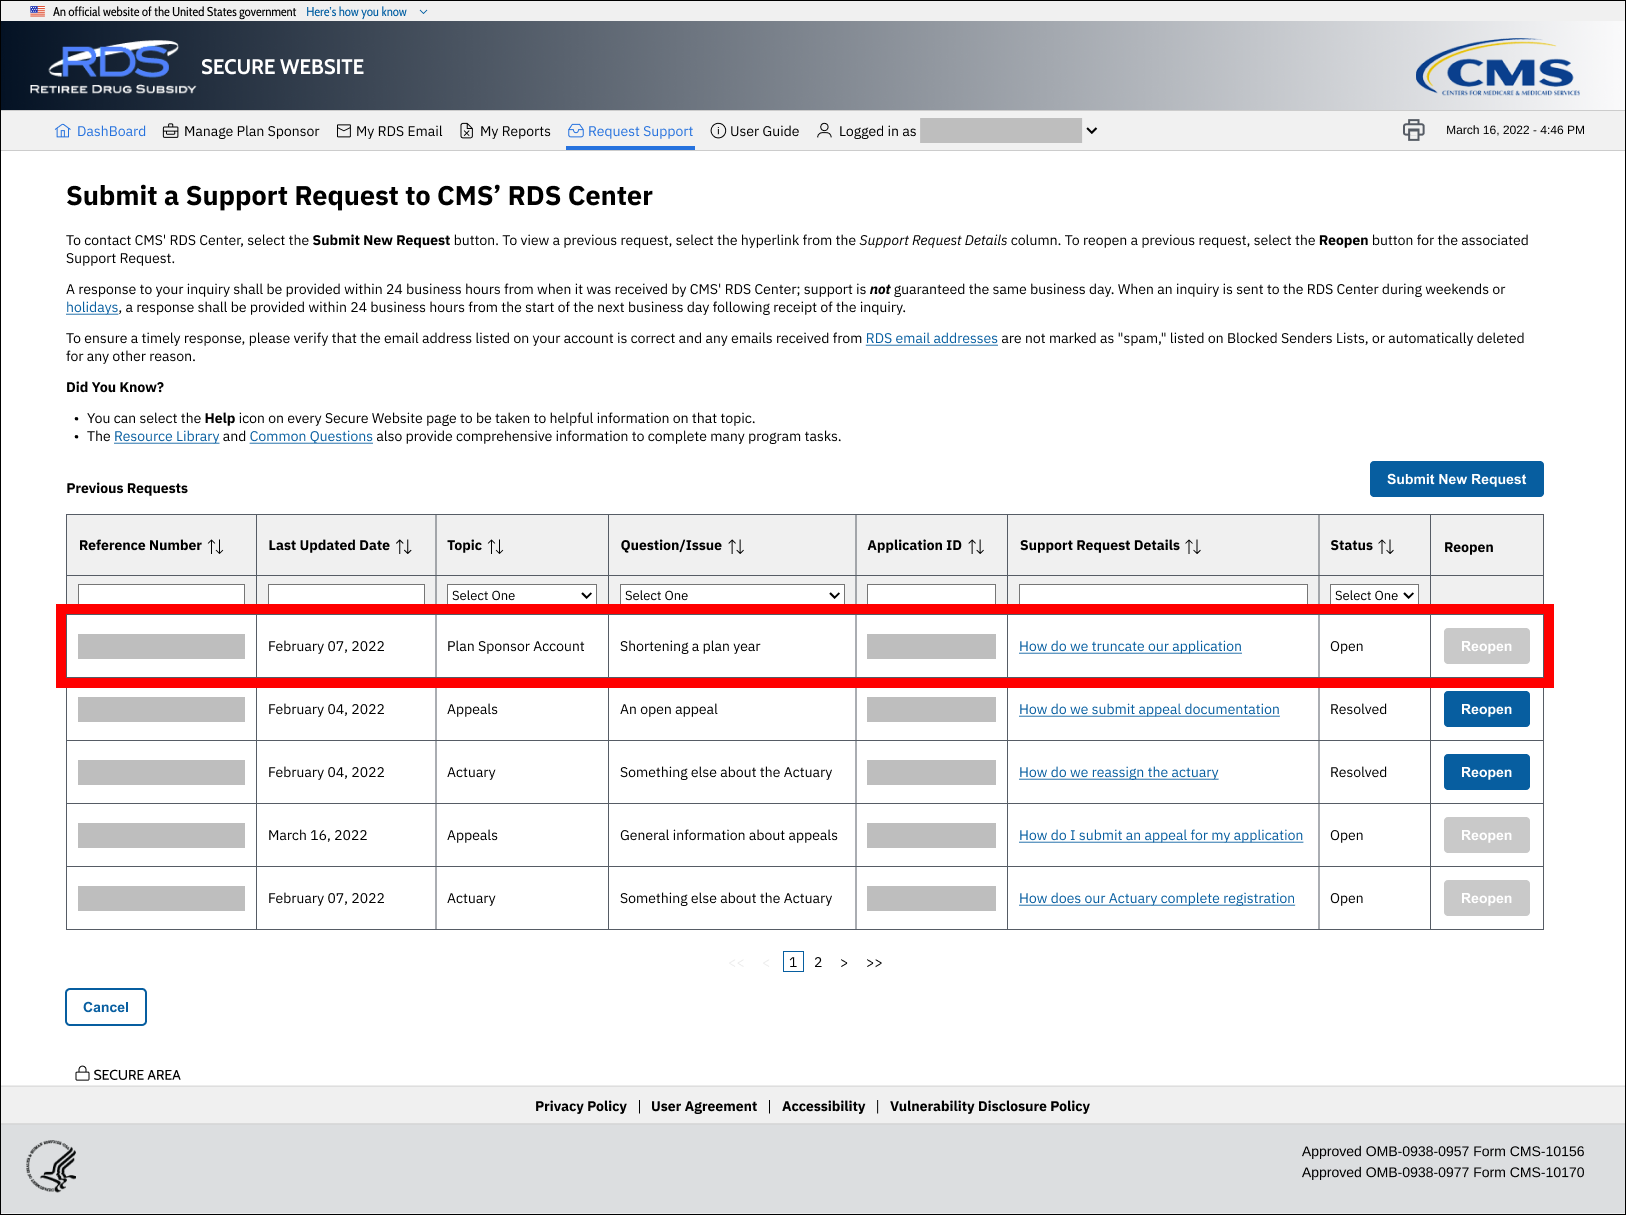 Submit a Support Request to CMS' RDS Center page with sample data. Updated row of Previous Requests table is highlighted.